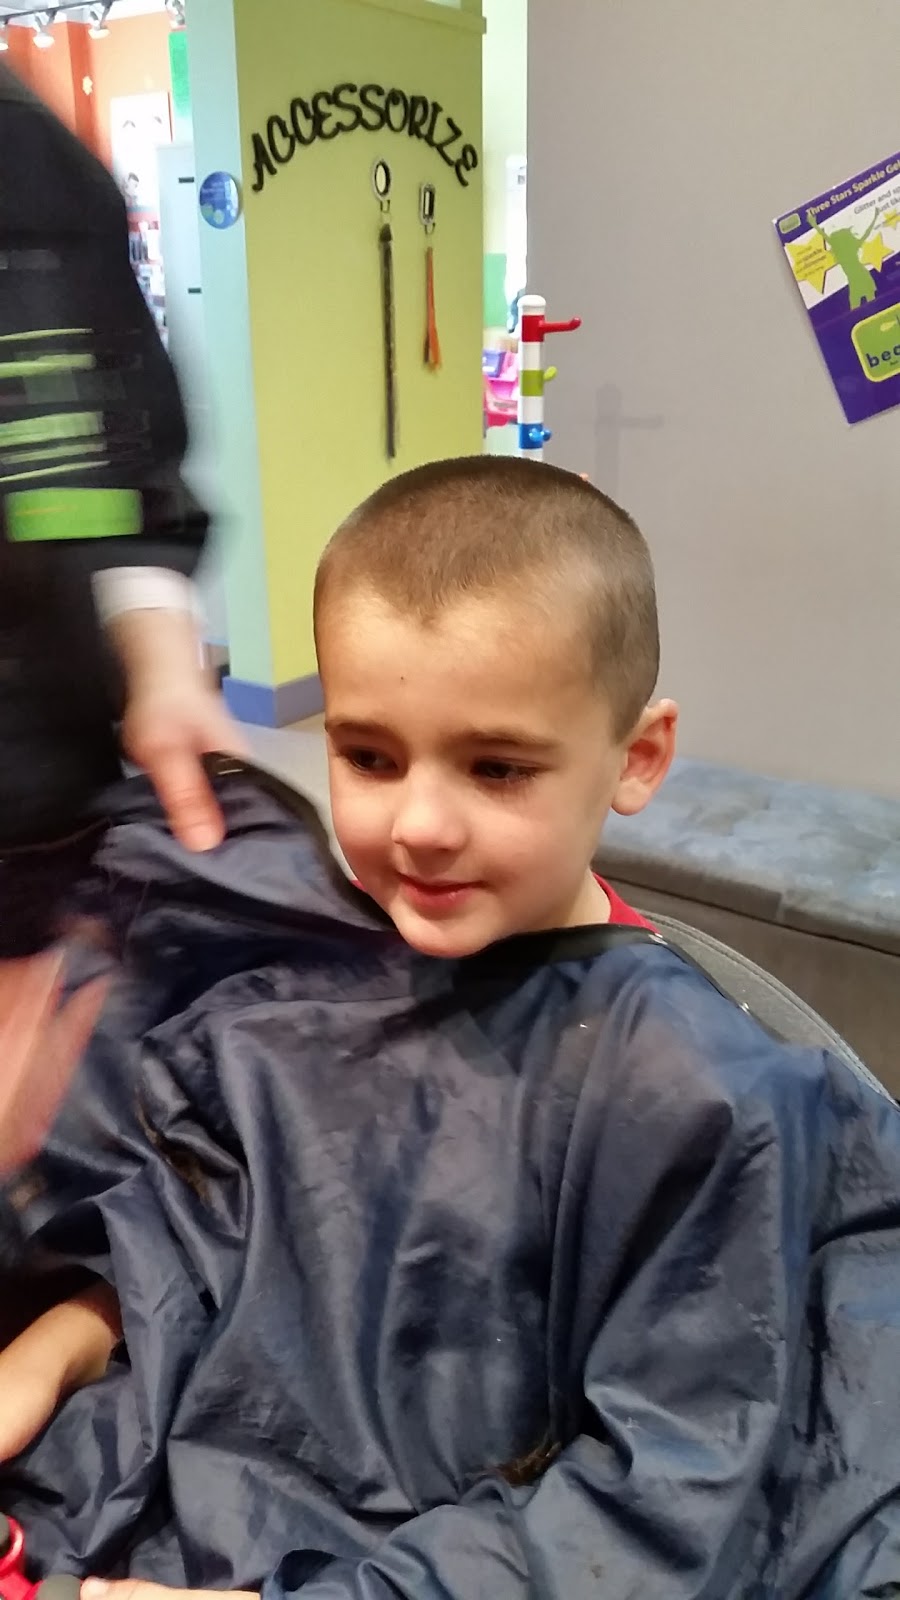 Beaners Fun Cuts For Kids | By Millennium Place, 2755 Broadmoor Blvd Unit #140, Sherwood Park, AB T8H 2W7, Canada | Phone: (780) 467-3300